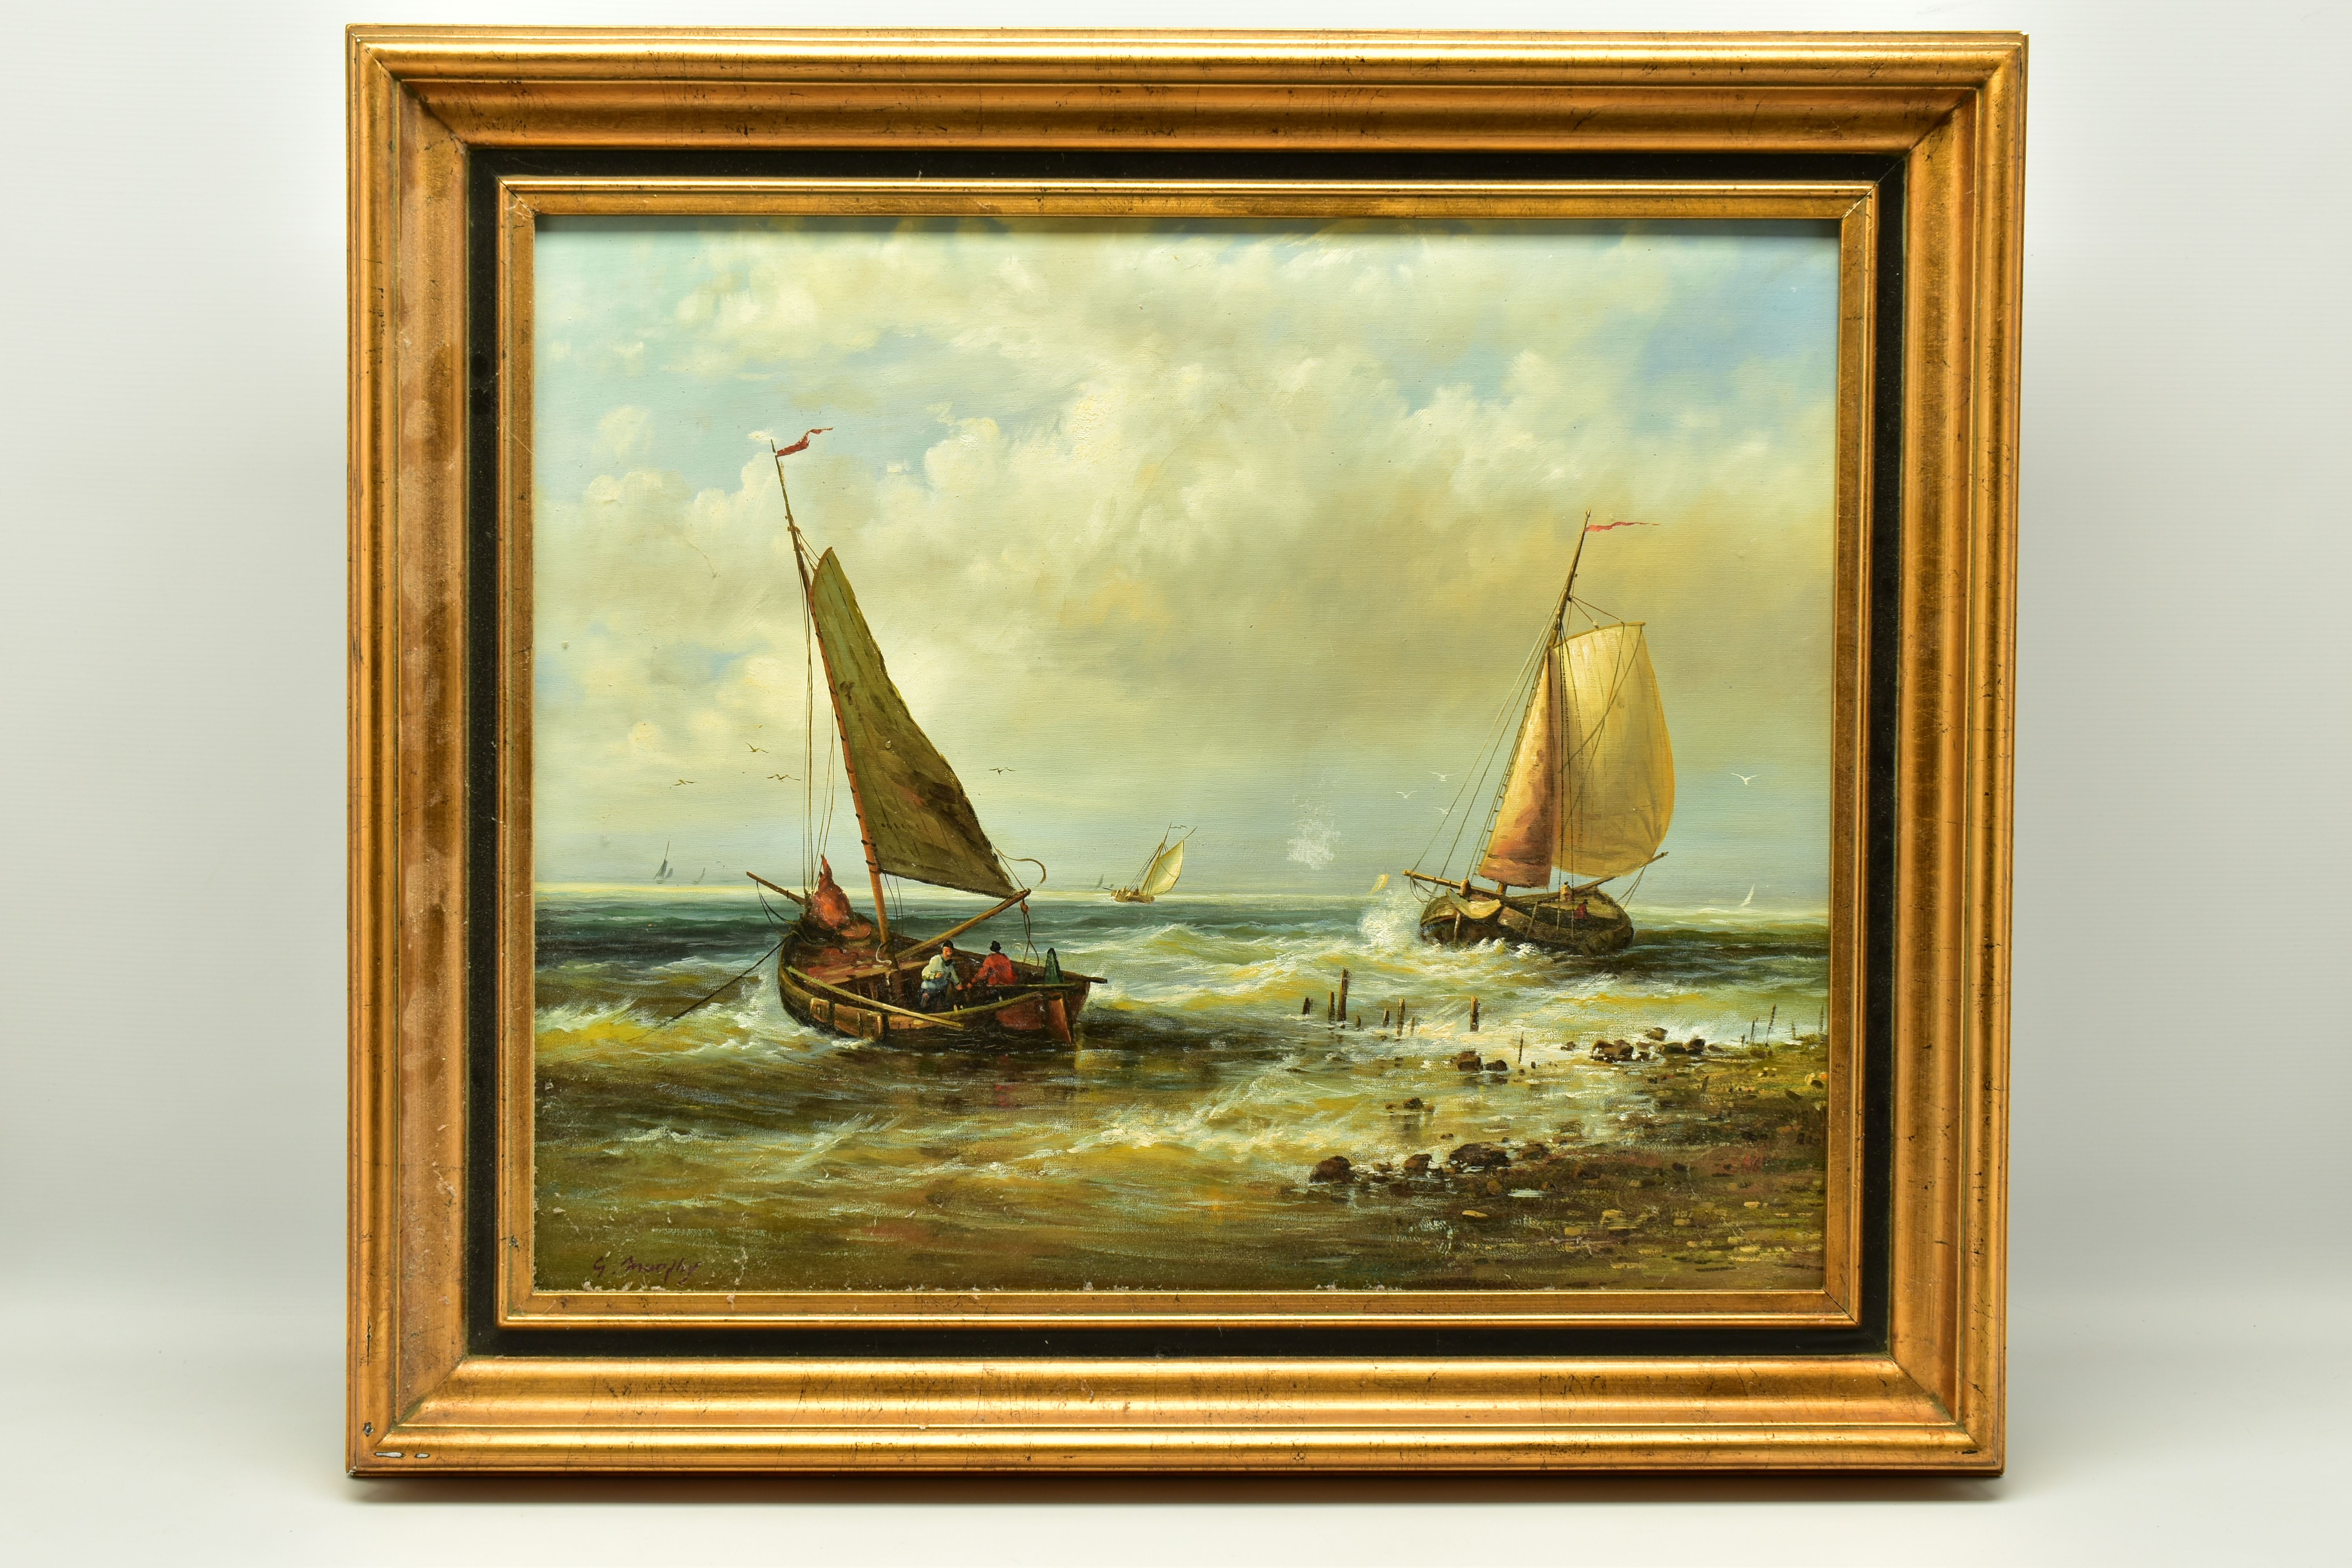 G MURPHY (20TH CENTURY) A NOSTALGIC MARITIME SCENE PAINTED IN A 19TH CENTURY STYLE, depicting